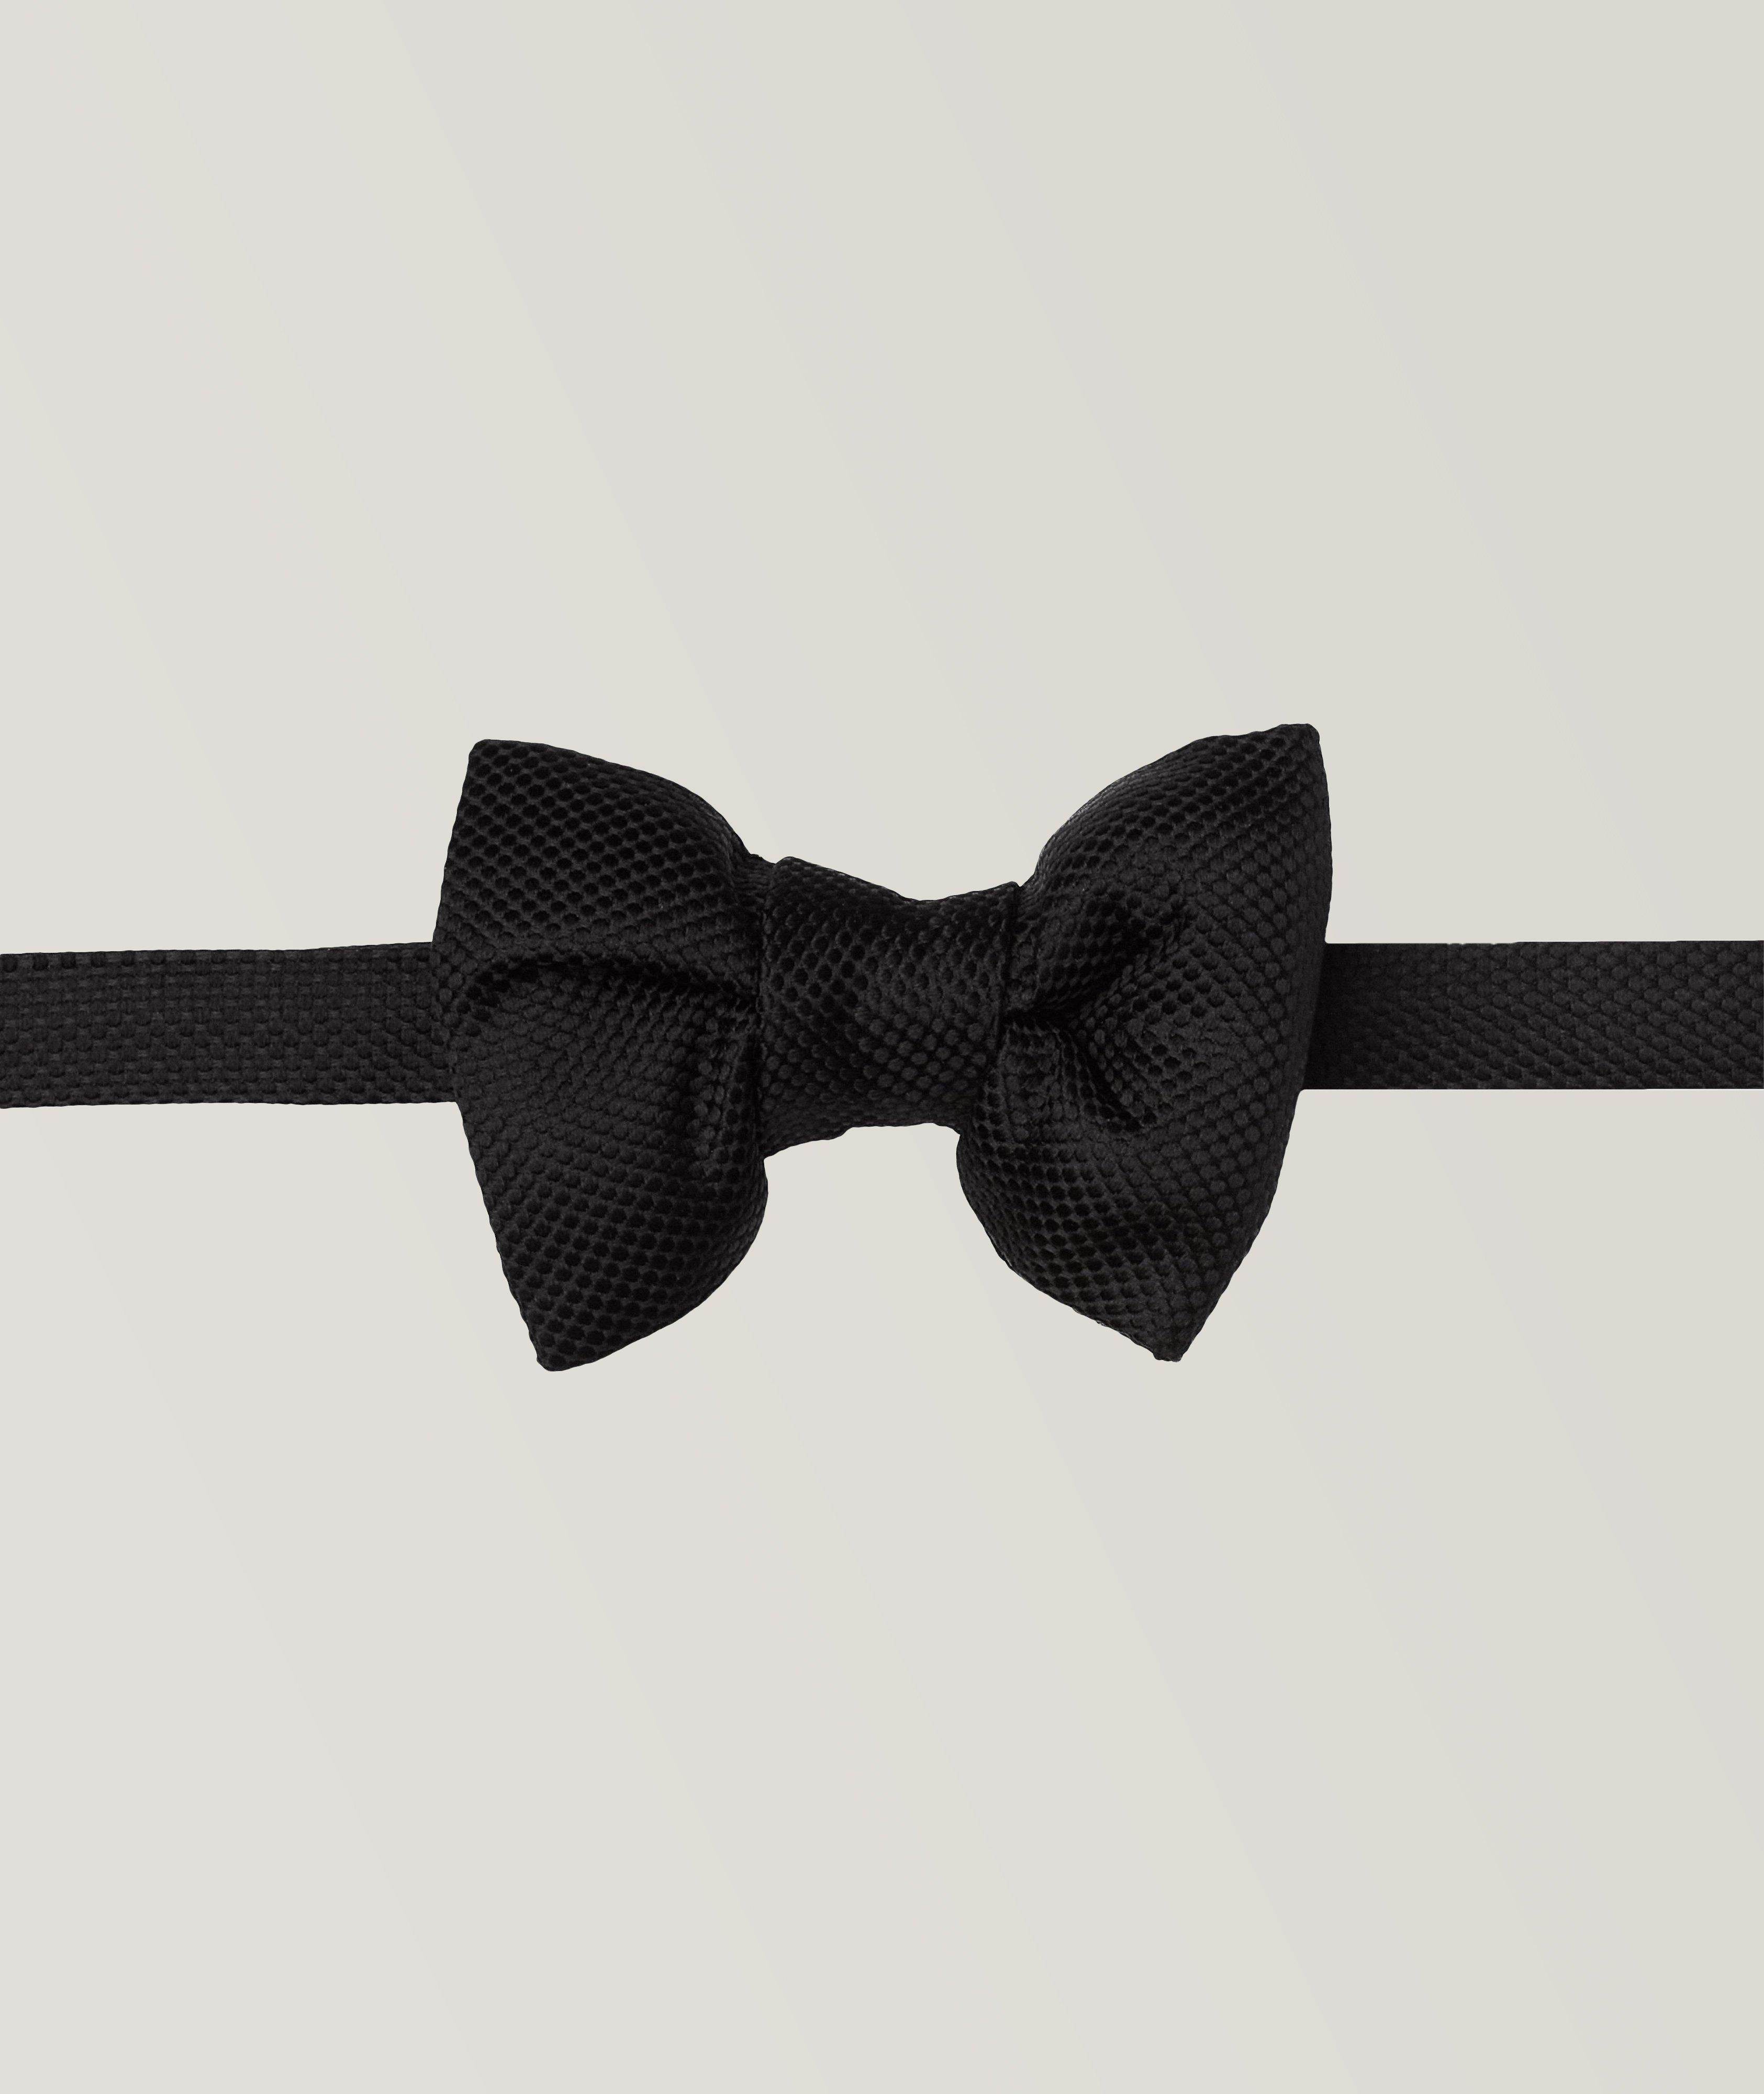 Textured Knit Patterned Bow Tie image 0